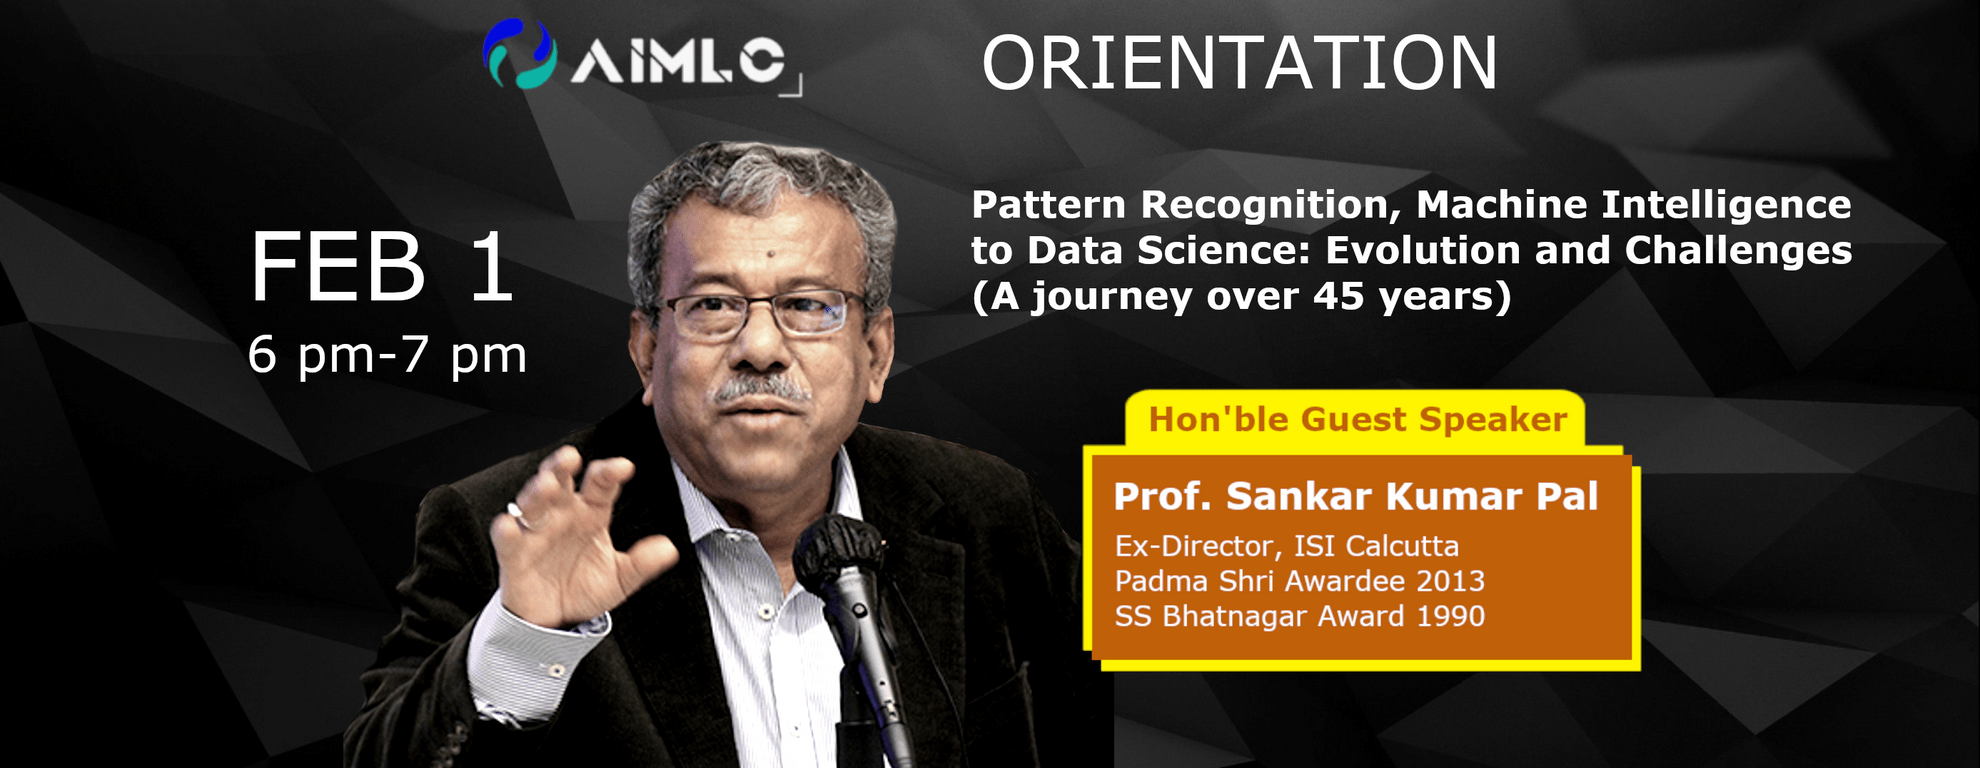 Orientation 2021: Guest Talk by Prof. S.K. Pal - Featured image